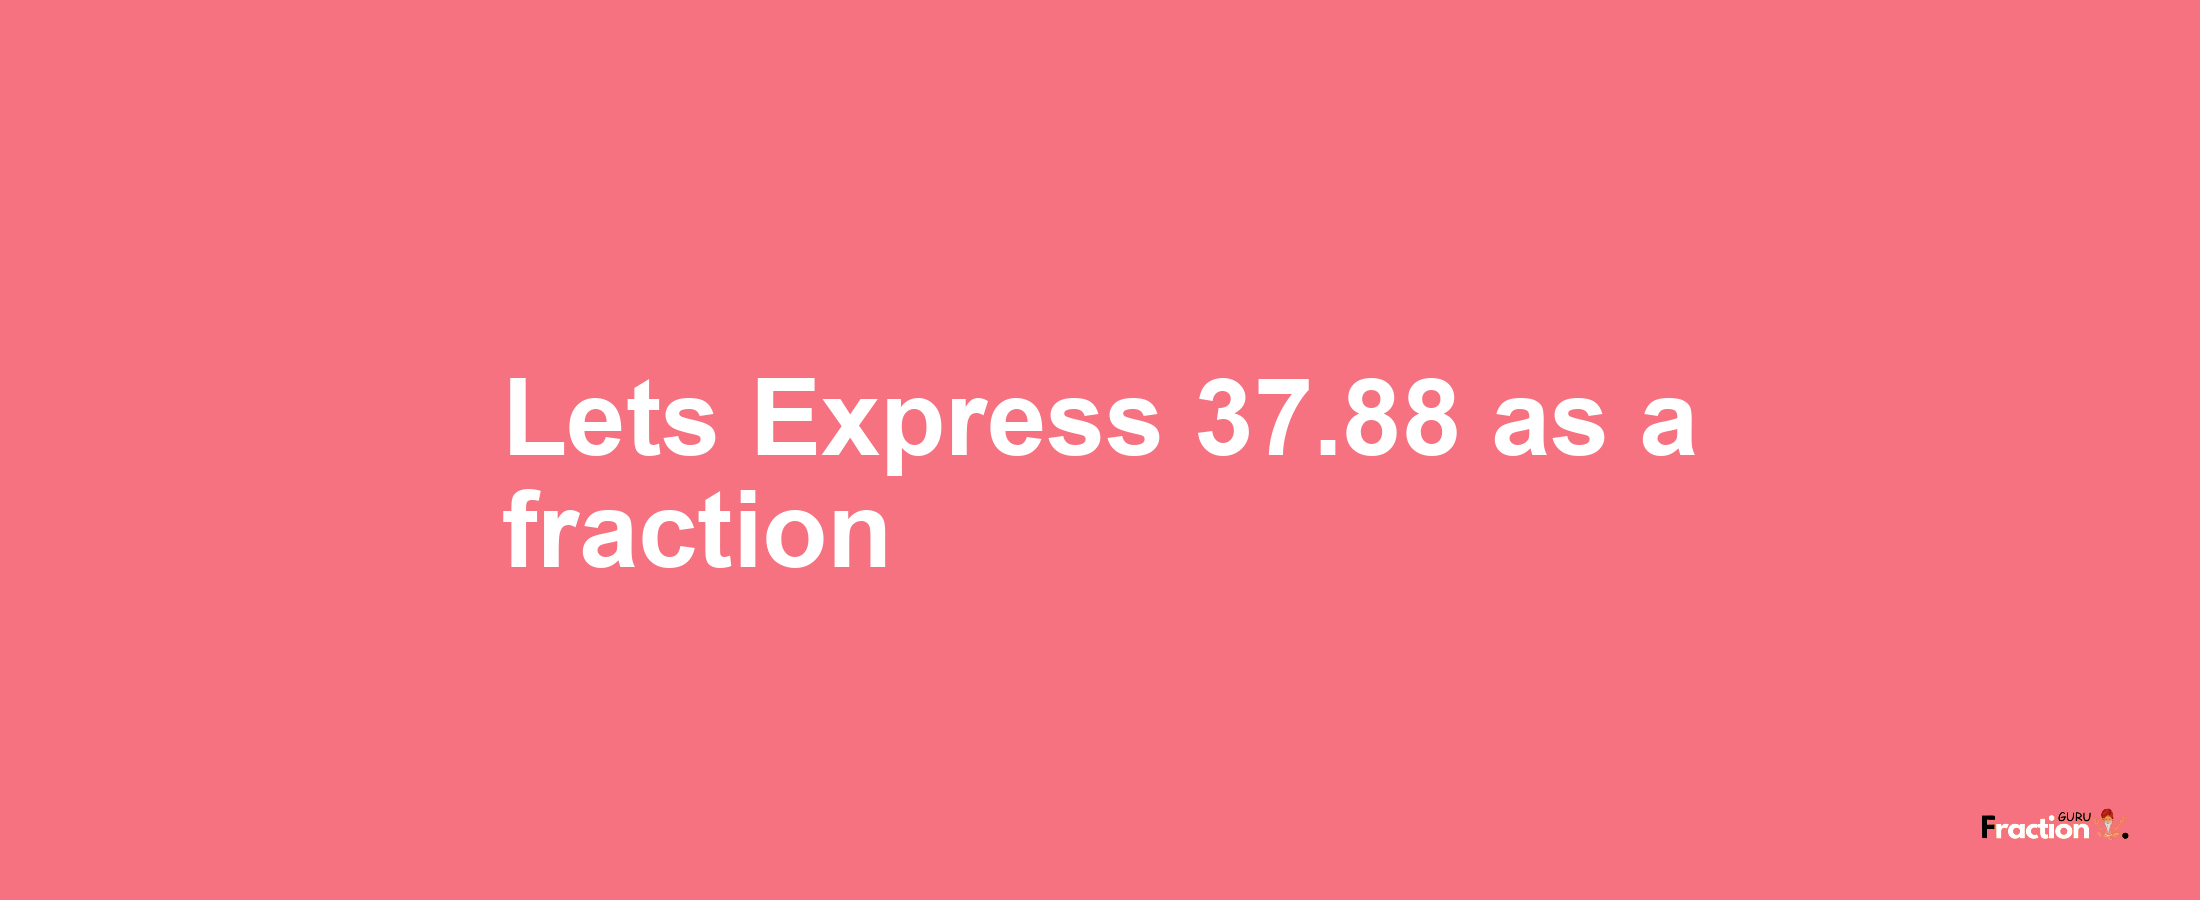 Lets Express 37.88 as afraction